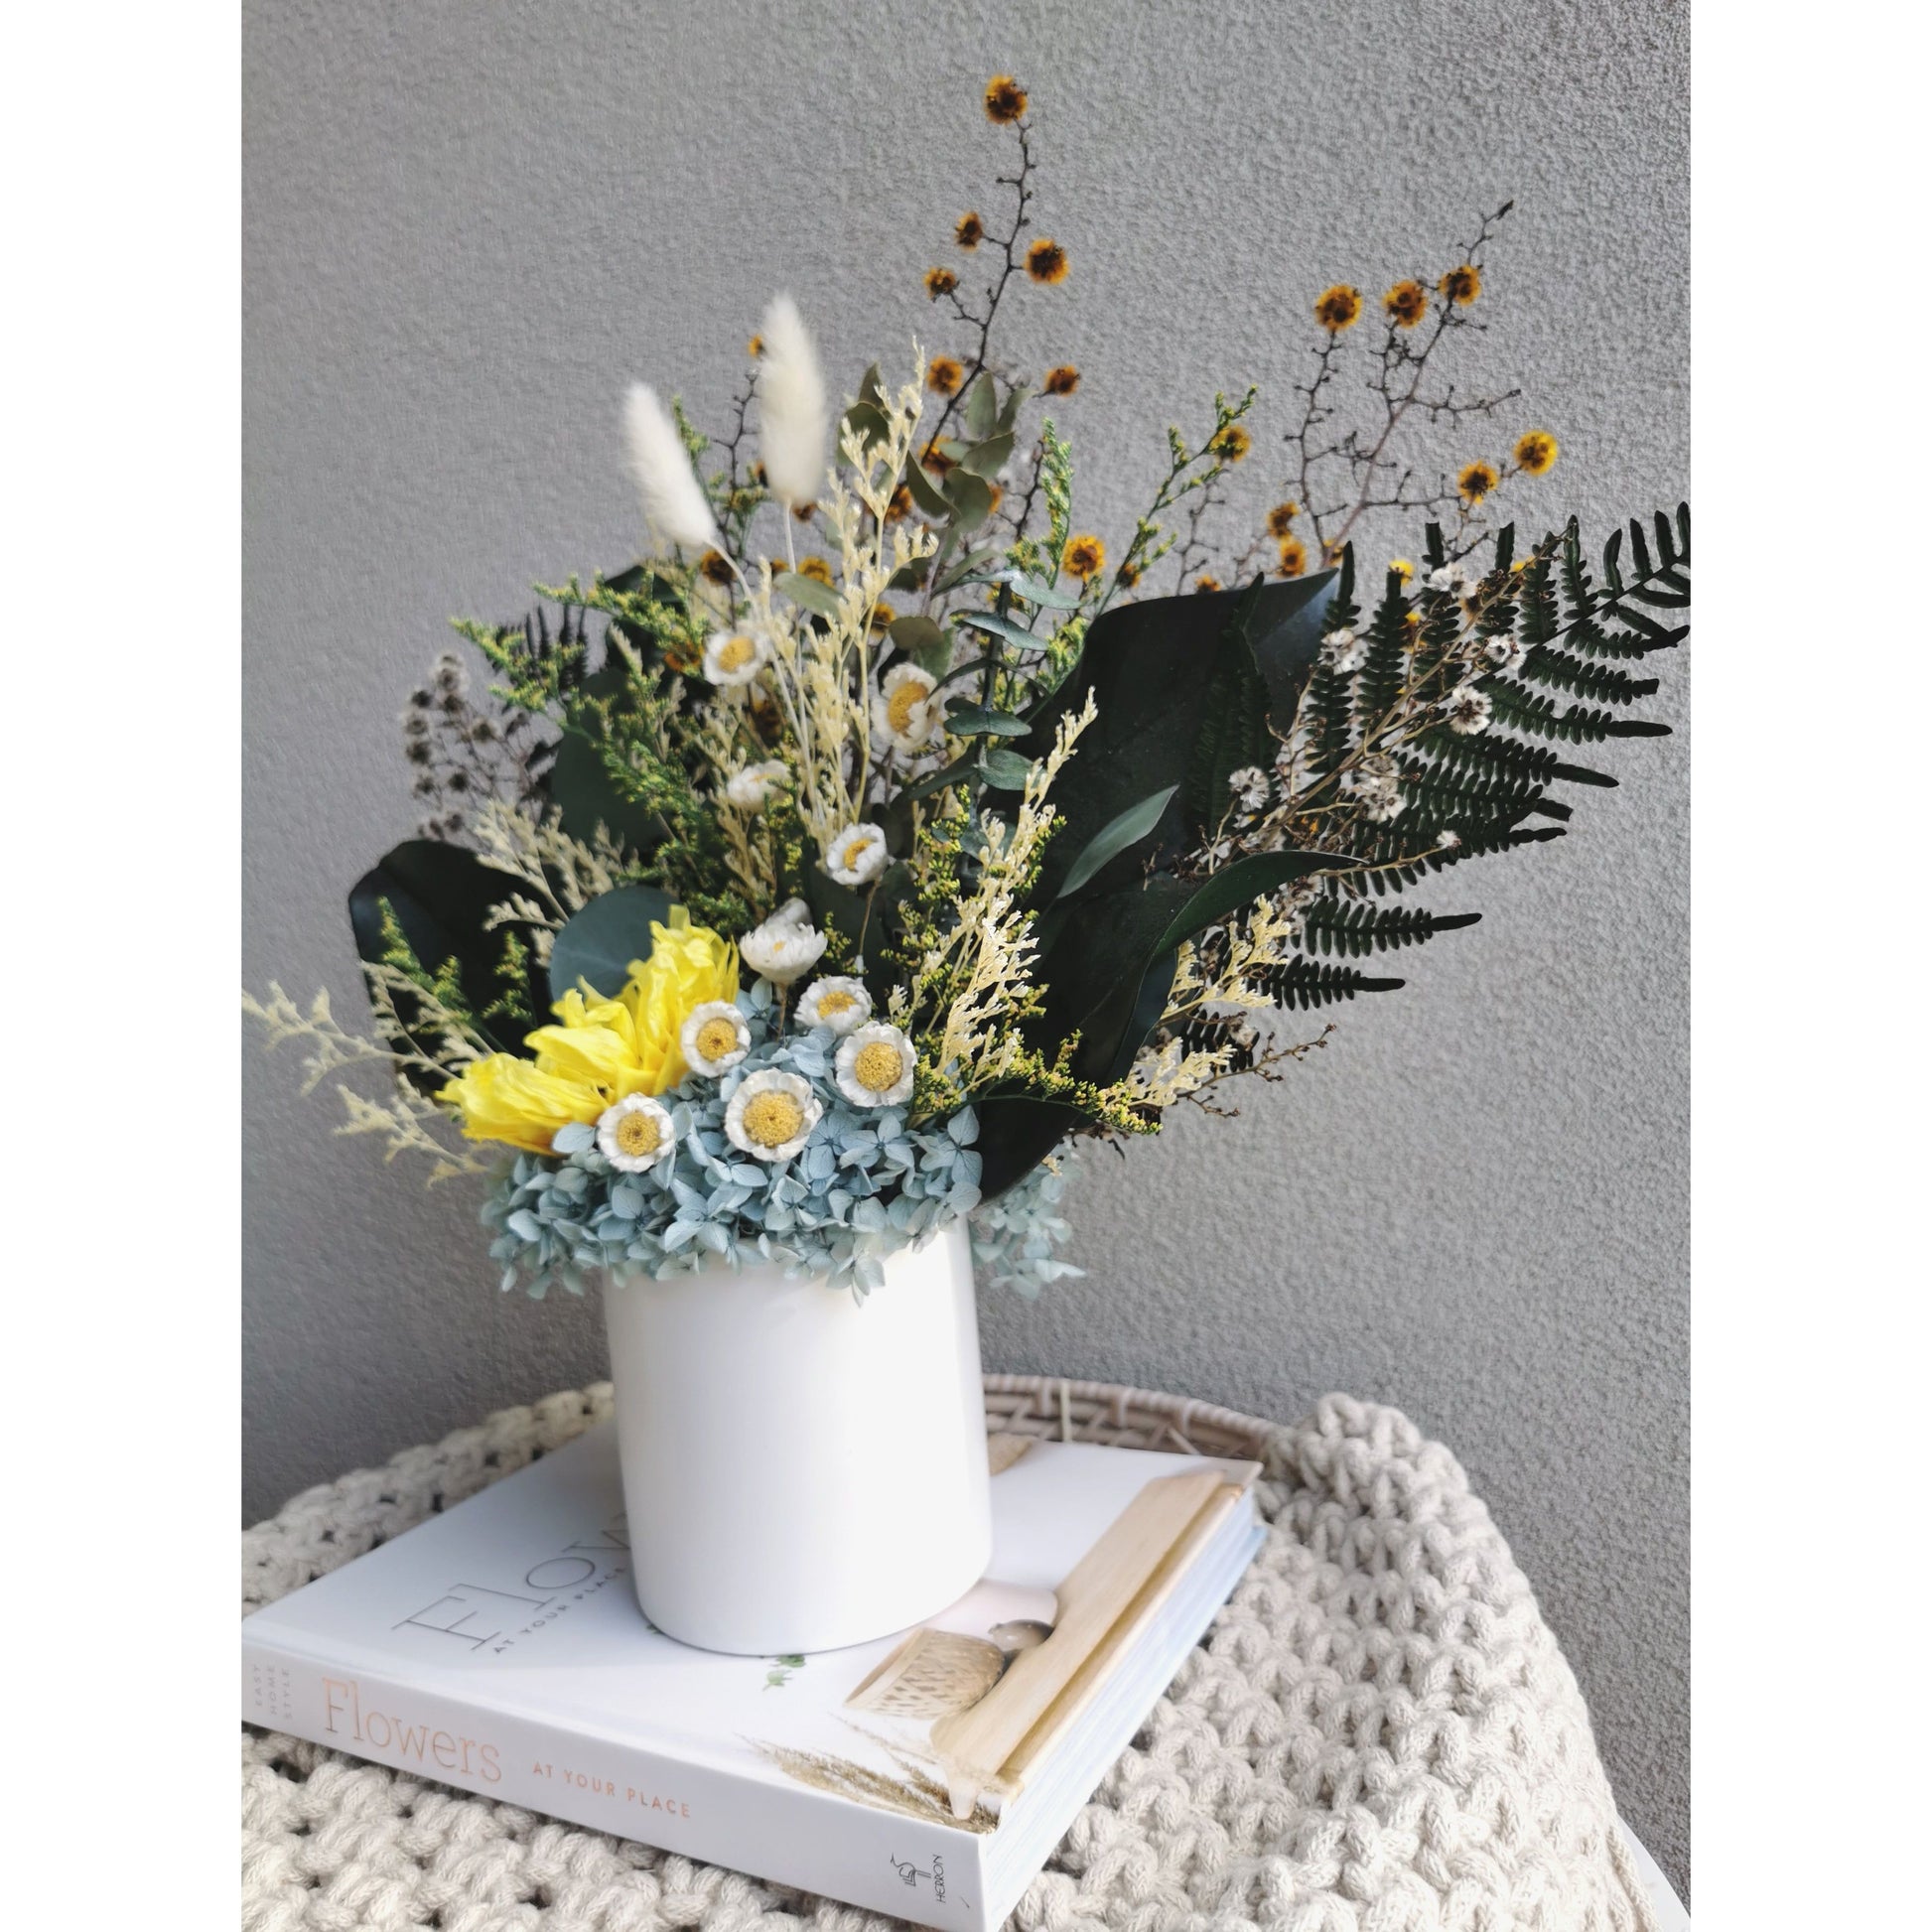 Dried & Preserved flower arrangement featuring a preserved yellow sunflower and yellow daisies and lush greenery and set in to a white pot. Photo shows arrangement sitting on a book on a side angle against a blank wall